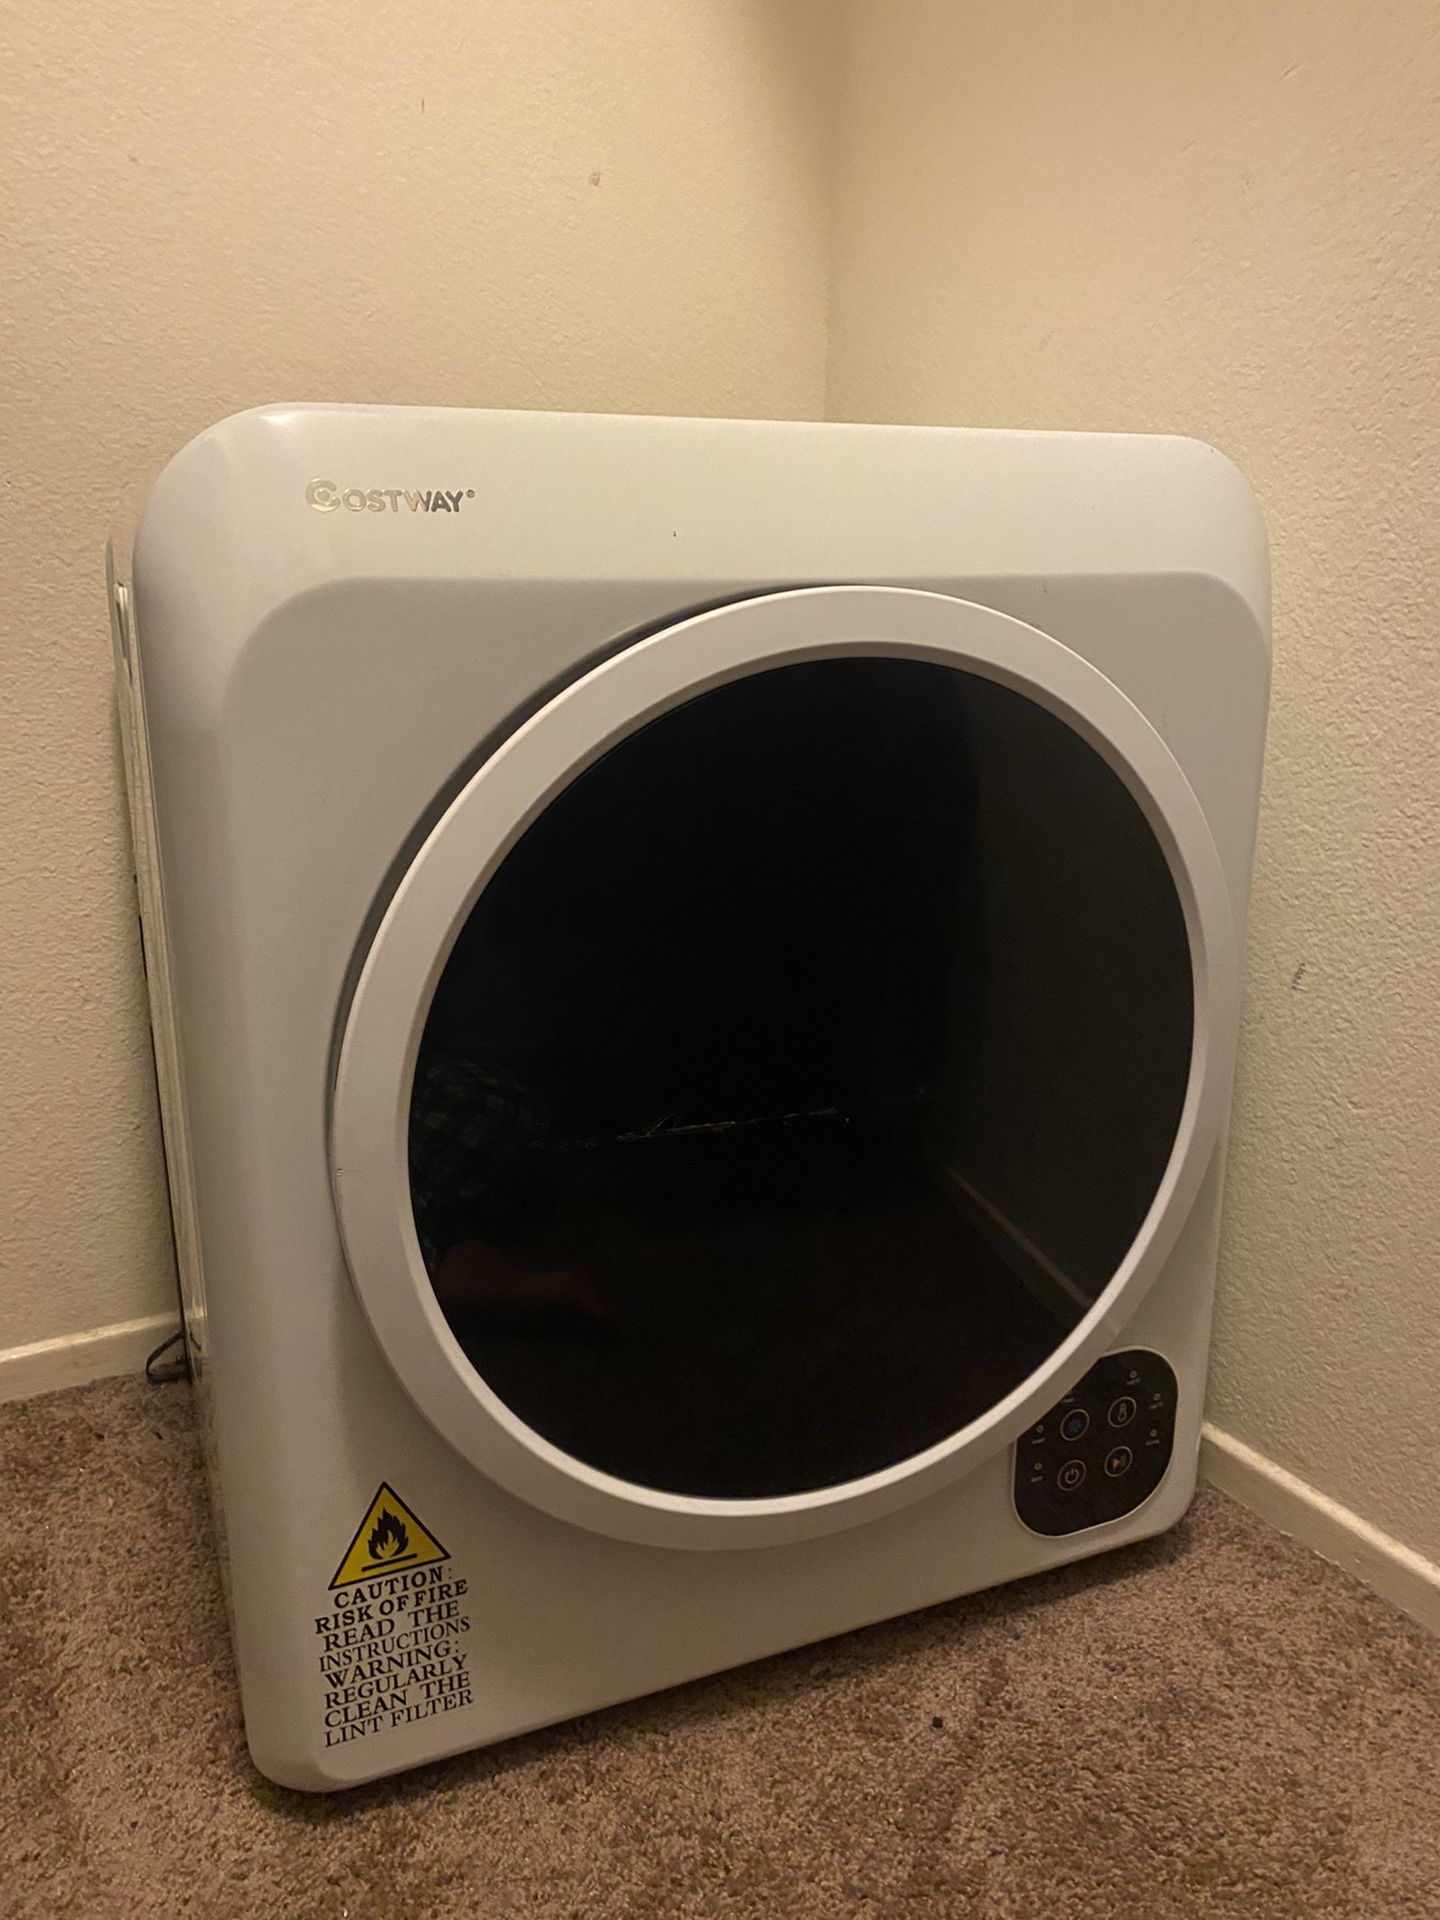 Costway Portable Dryer : White for Sale in Upland, CA - OfferUp